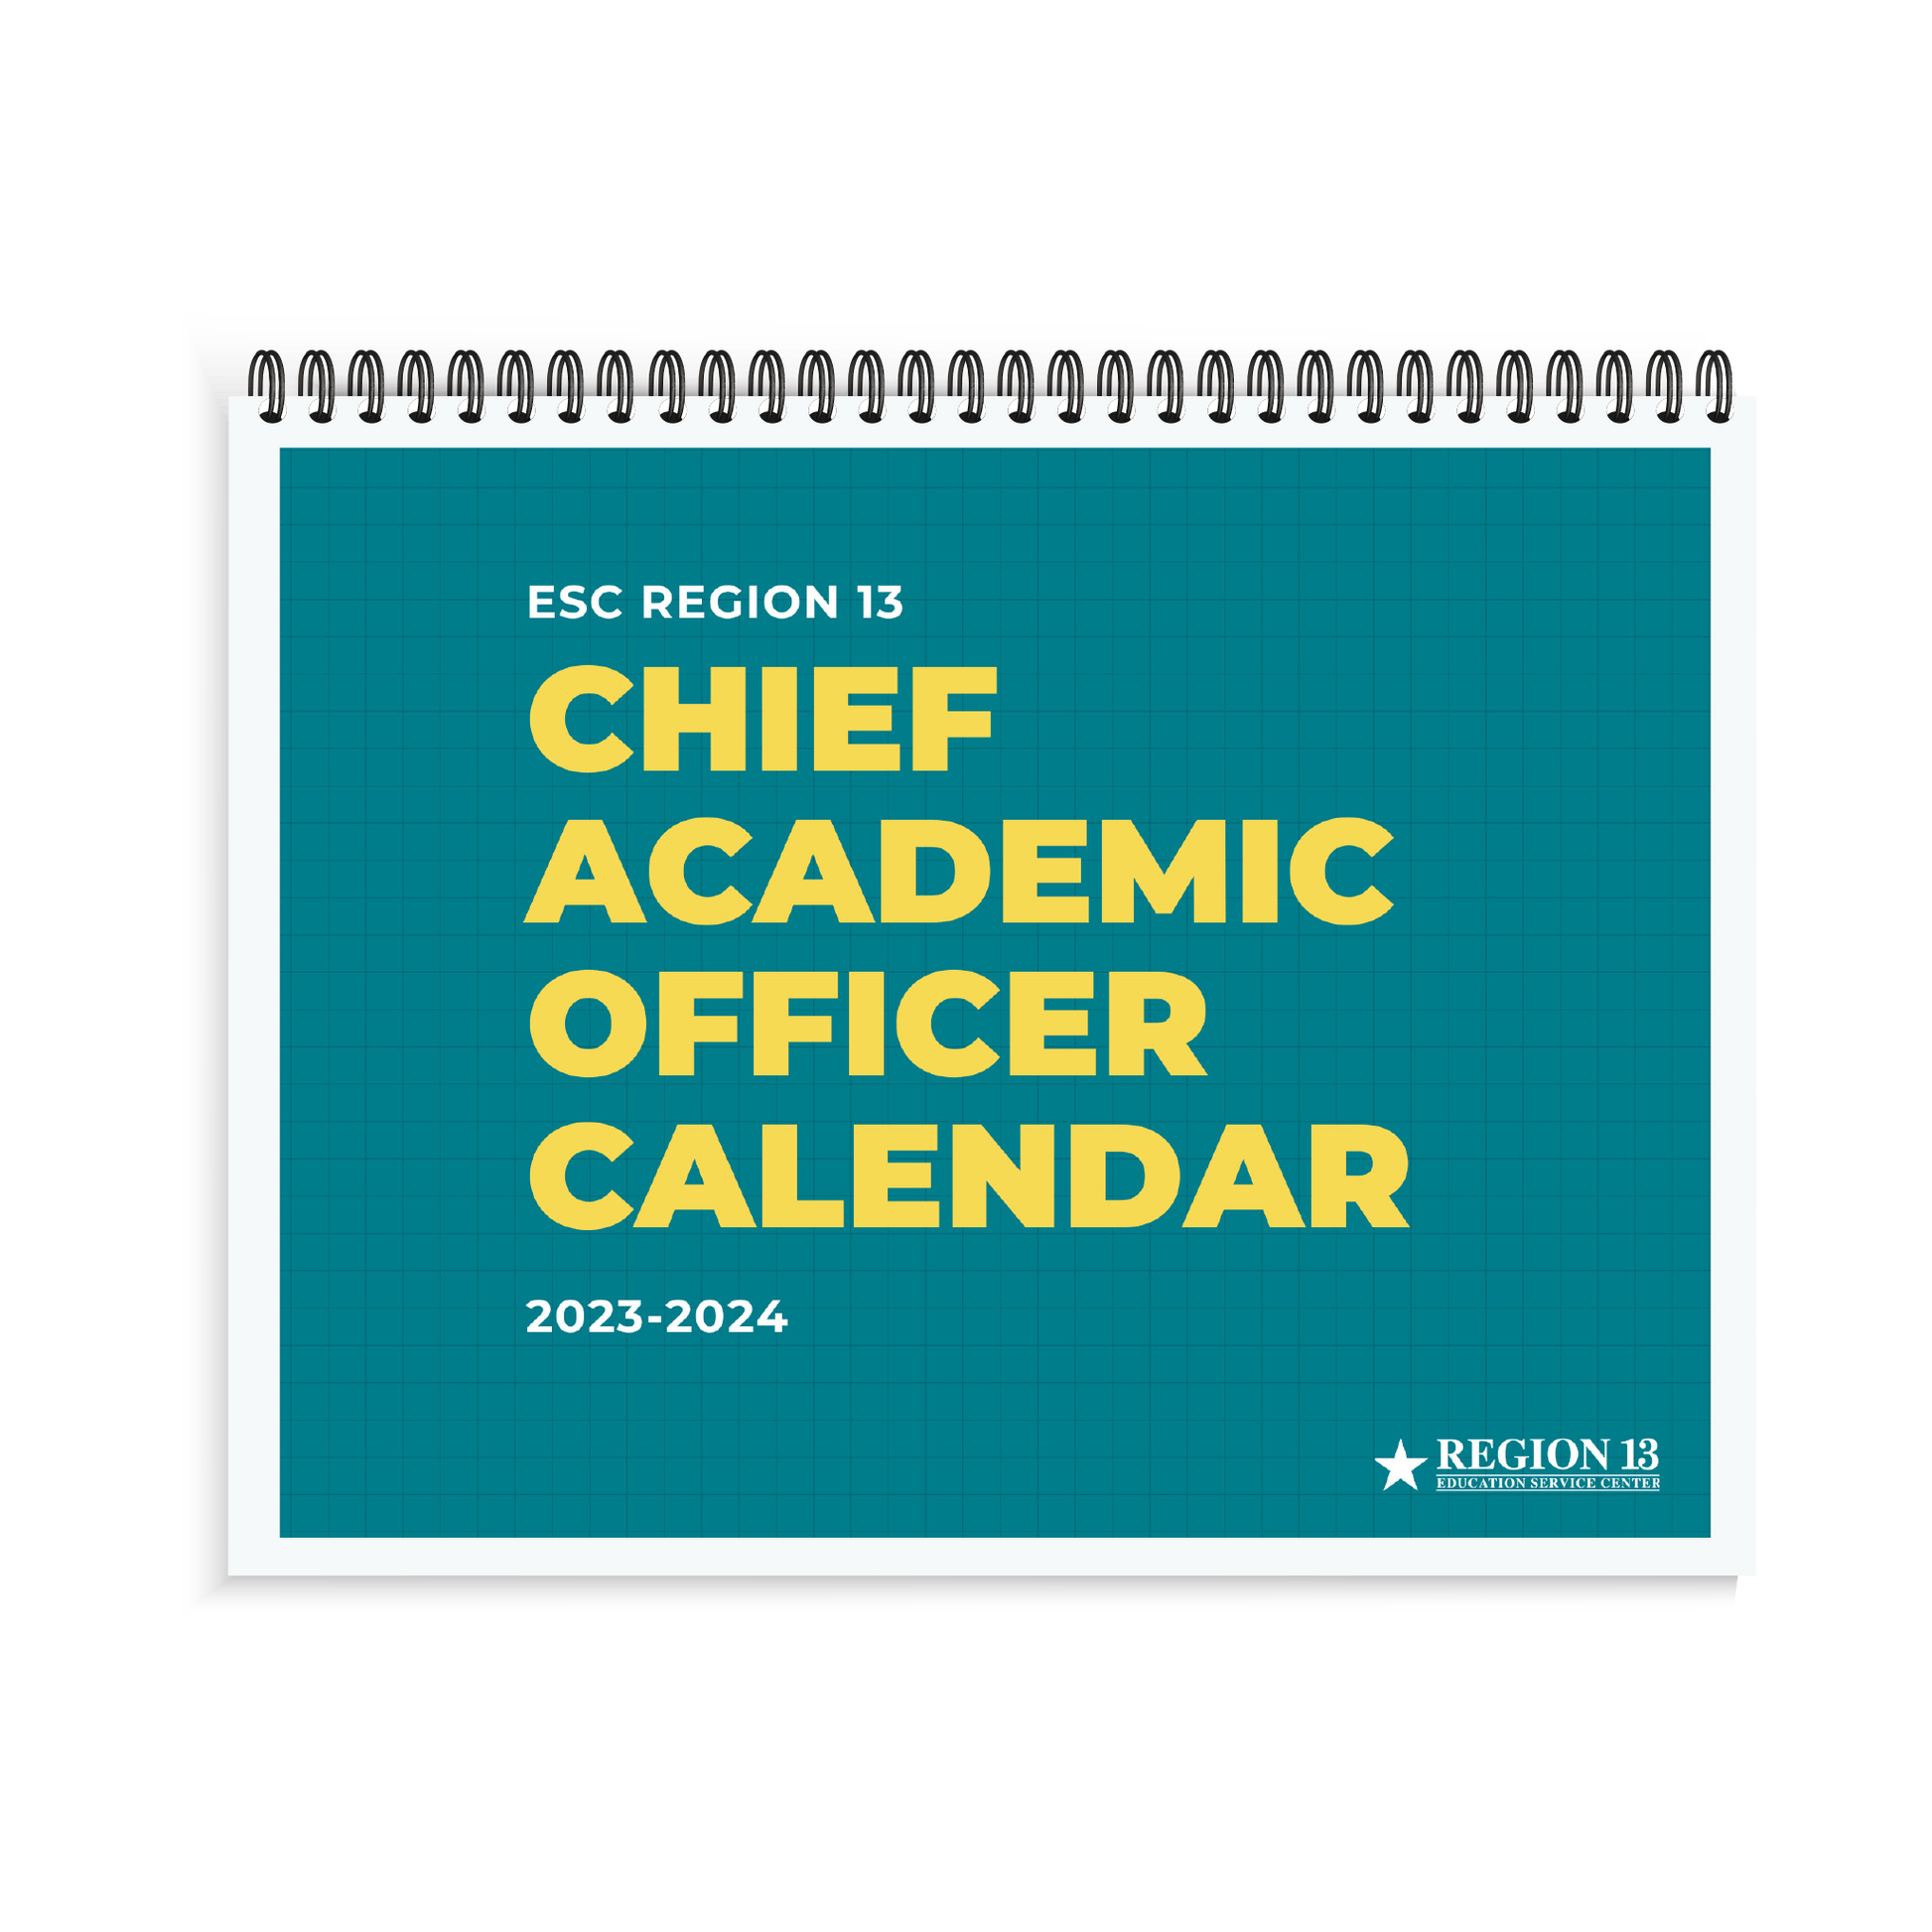 Preview of the teal and yellow cover of the Region 13 Chief Academic Officer Calendar.